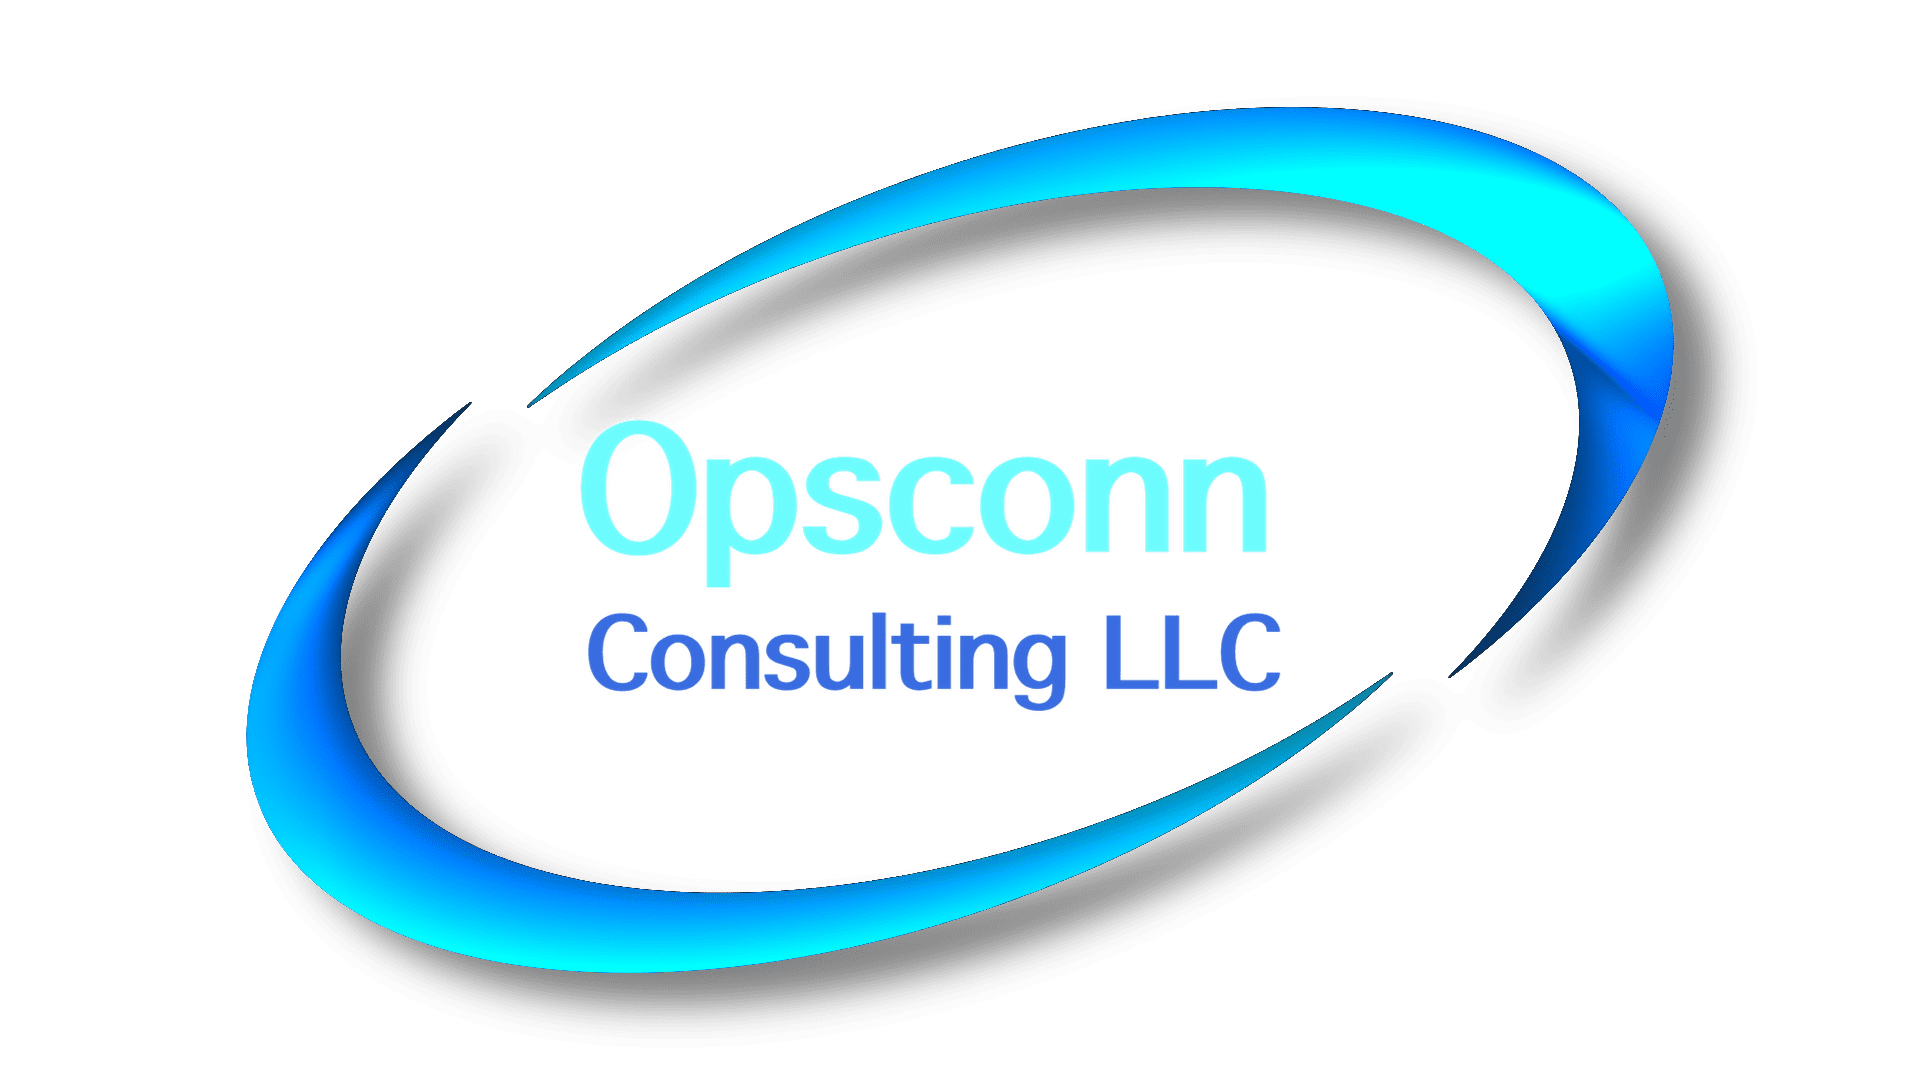 Opsconn Consulting